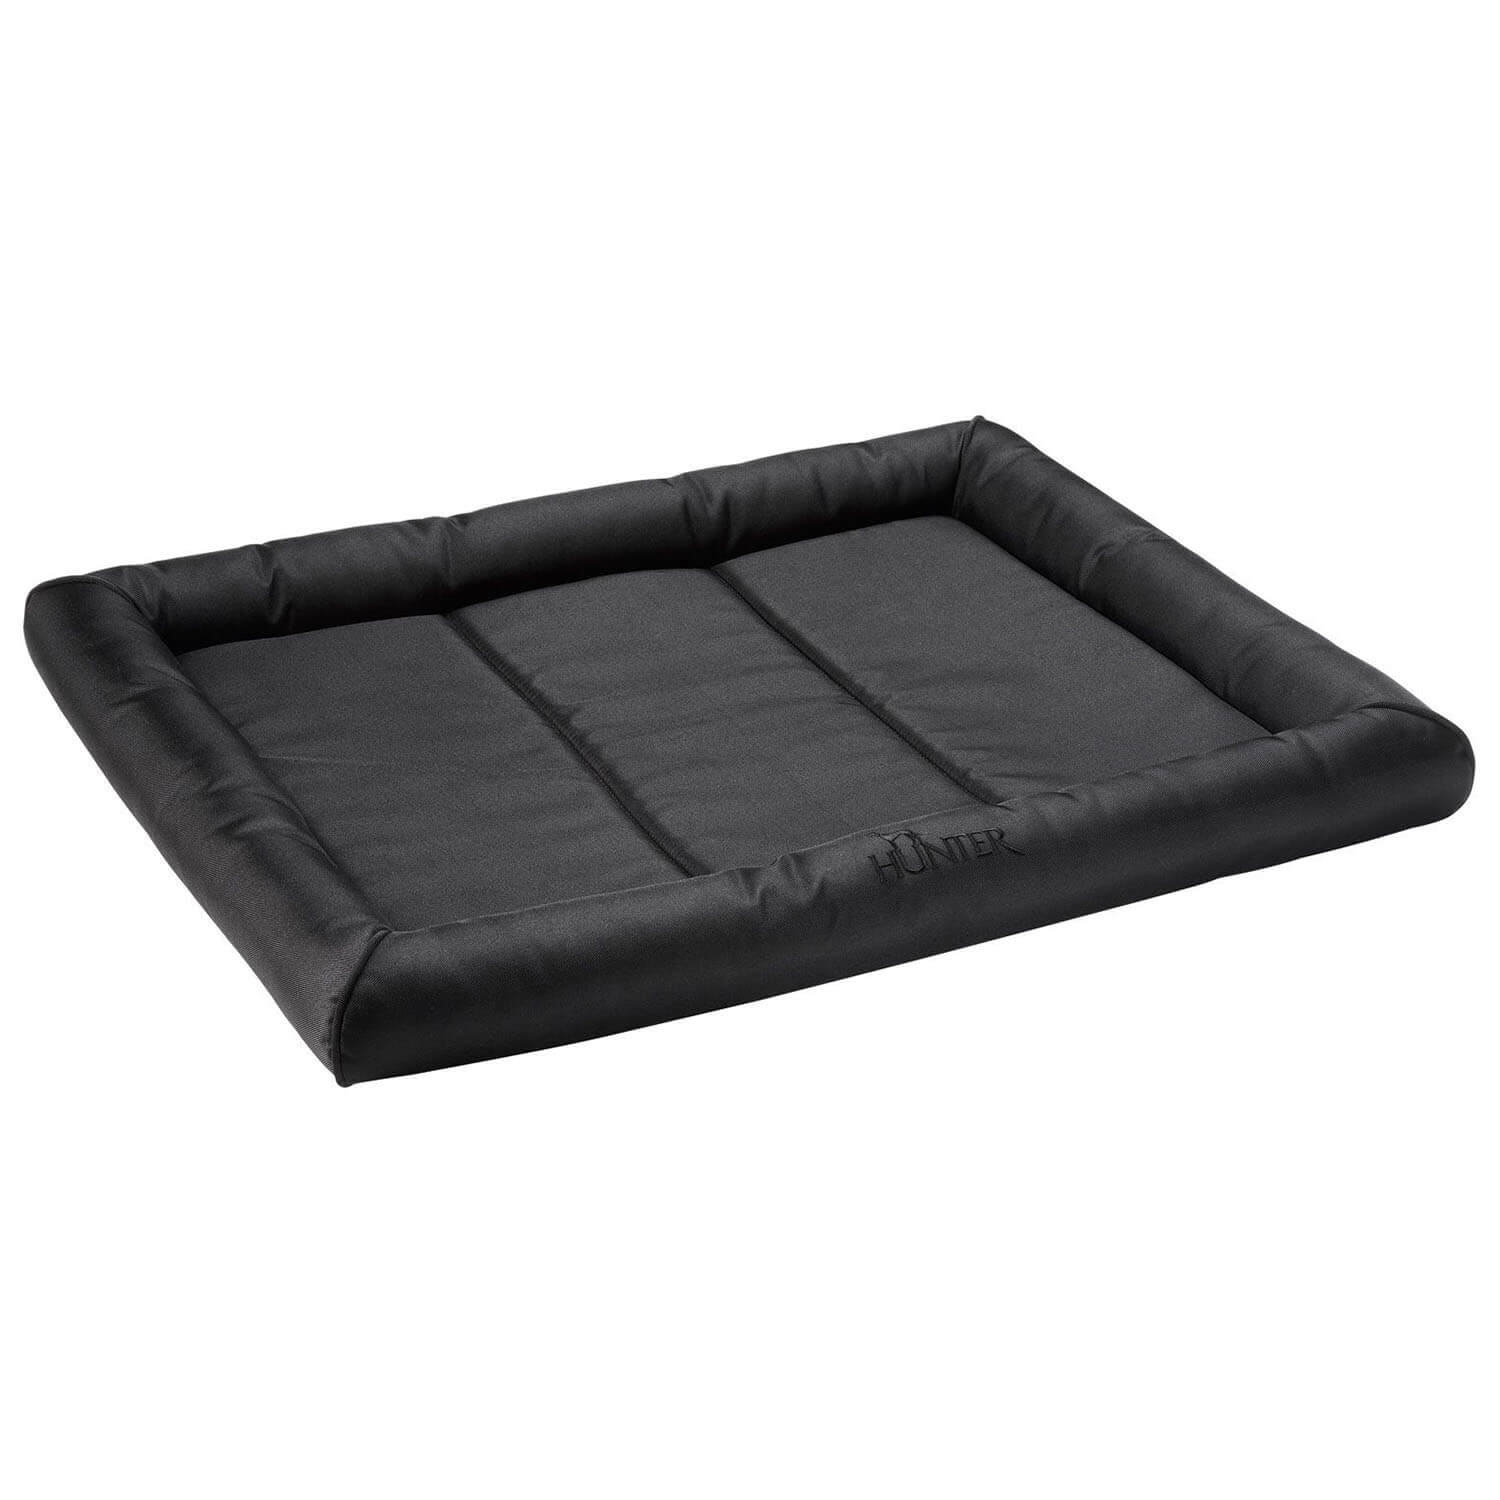 Hunter dogbed vermont (Black) - Dog Accessories